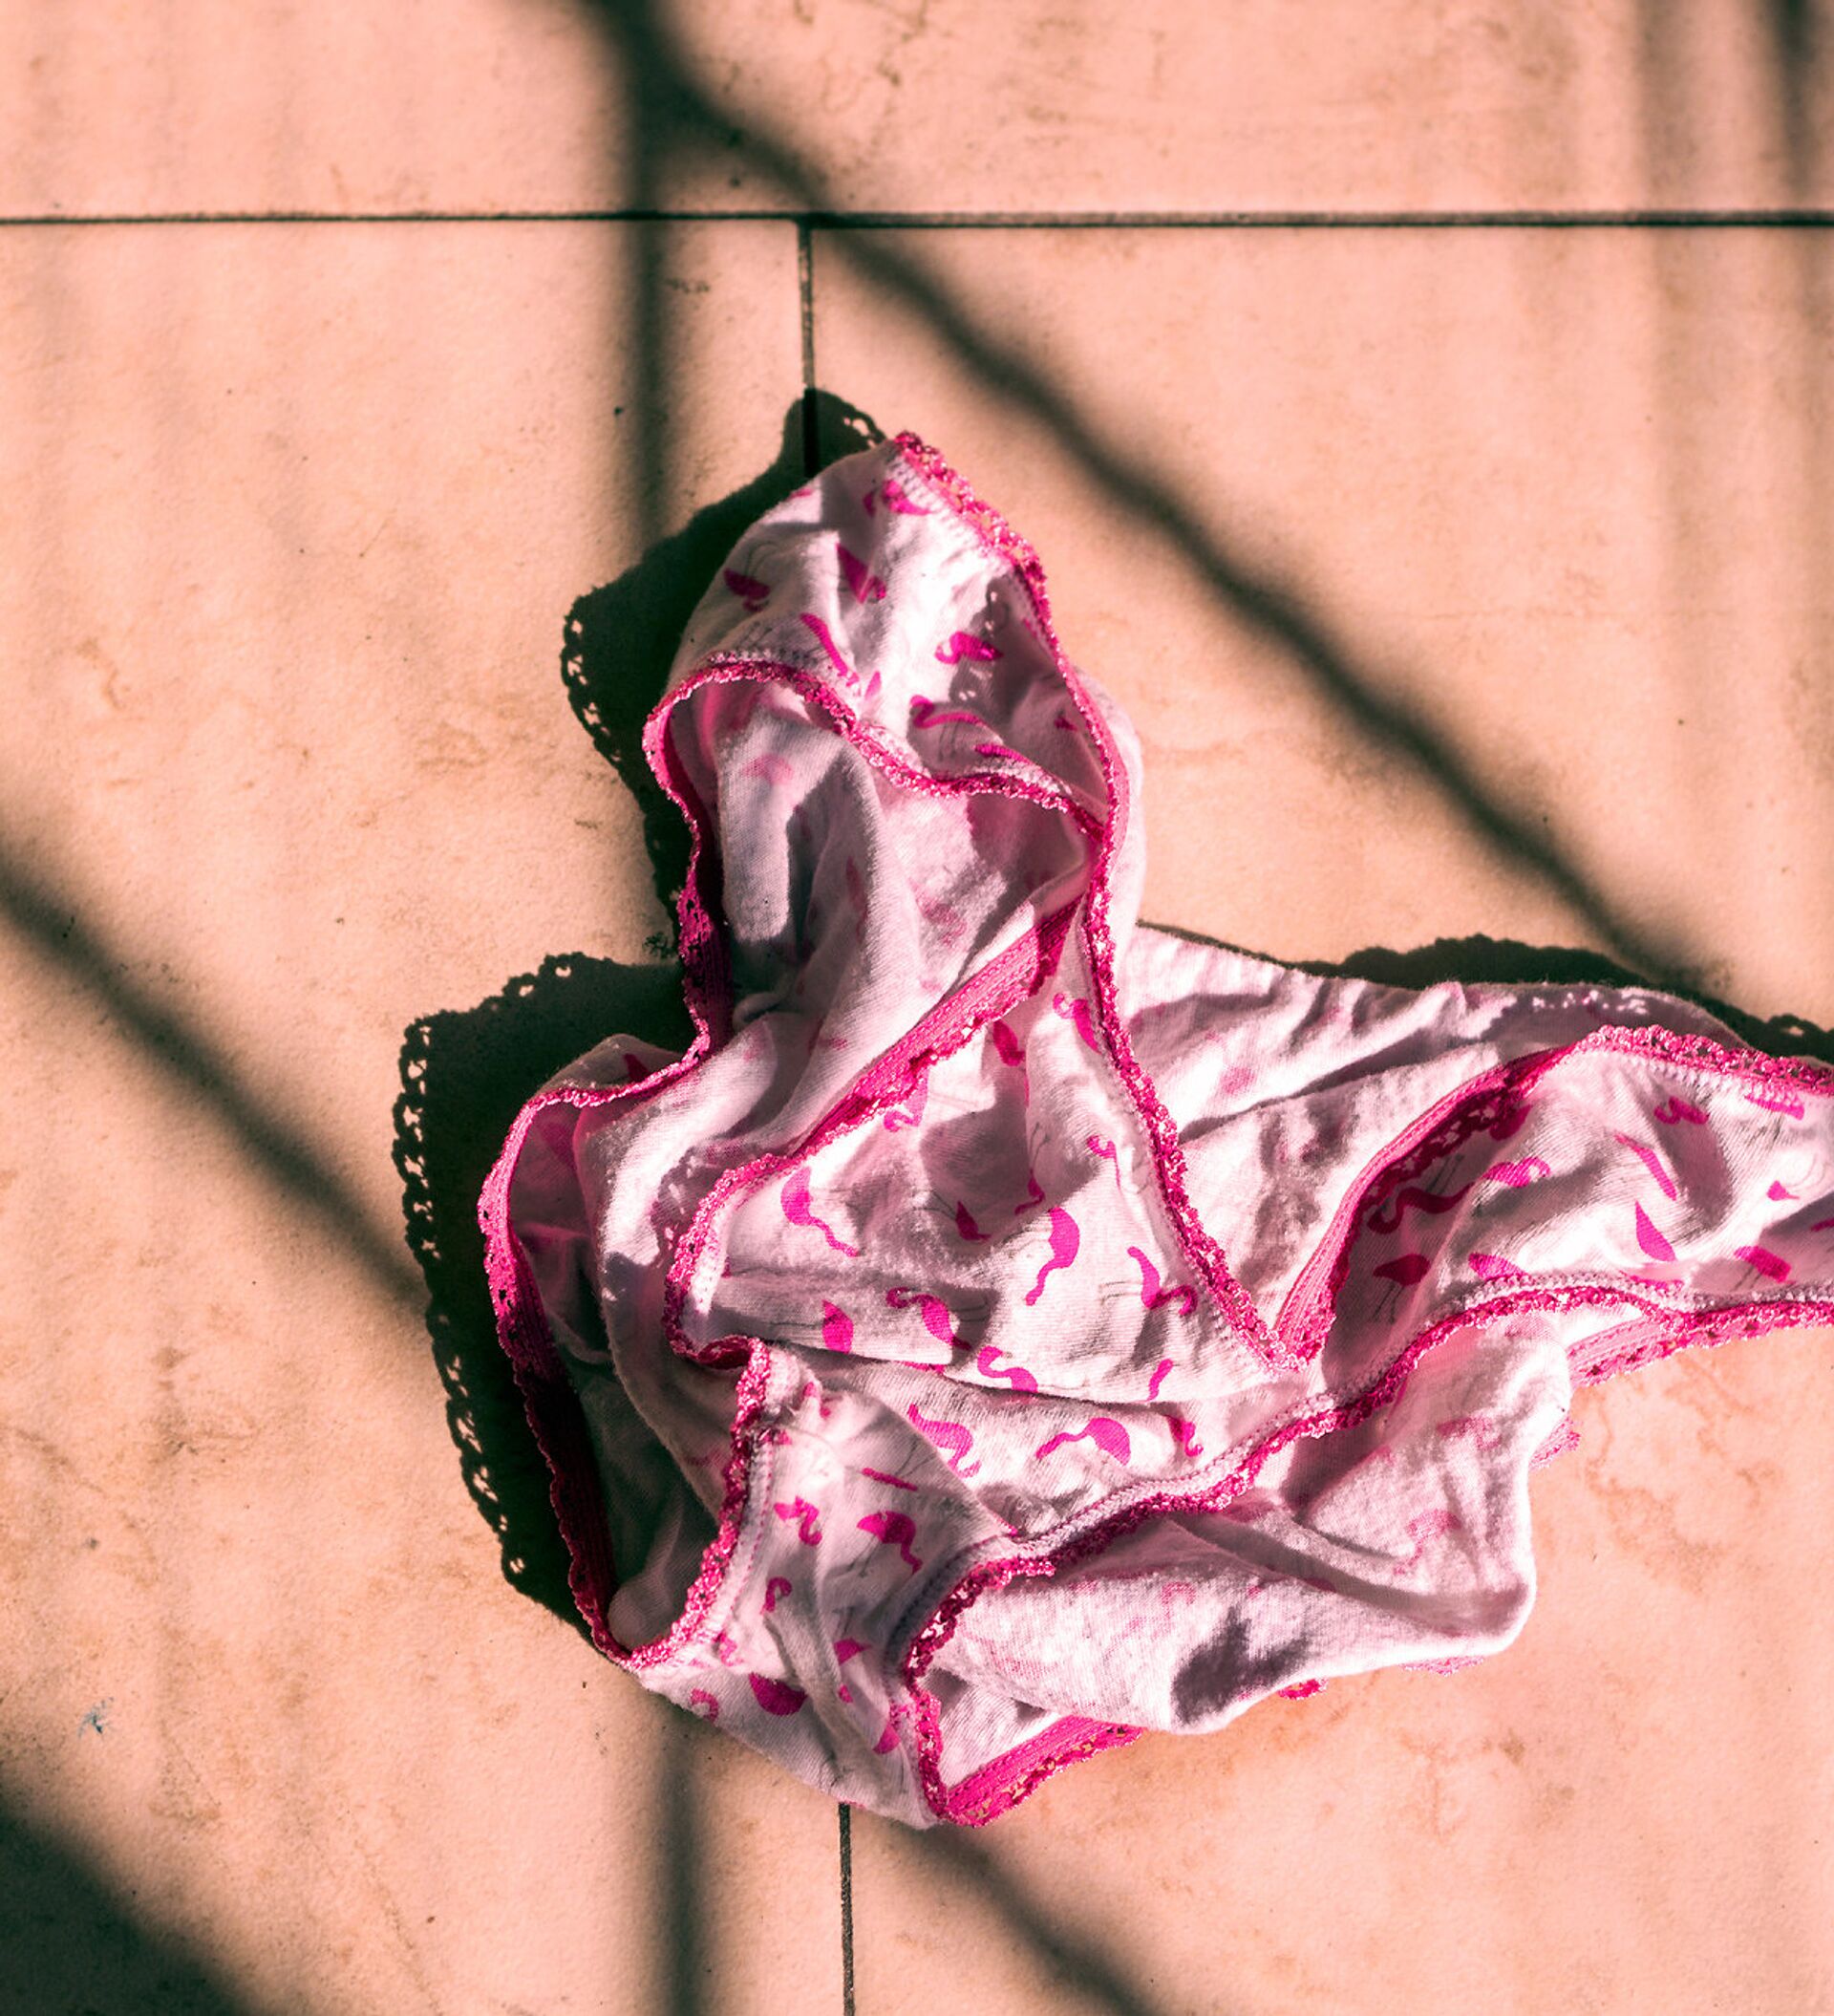 Airing Dirty Laundry: Worn Panties Become Hot Commodity in Denmark -  17.11.2017, Sputnik International